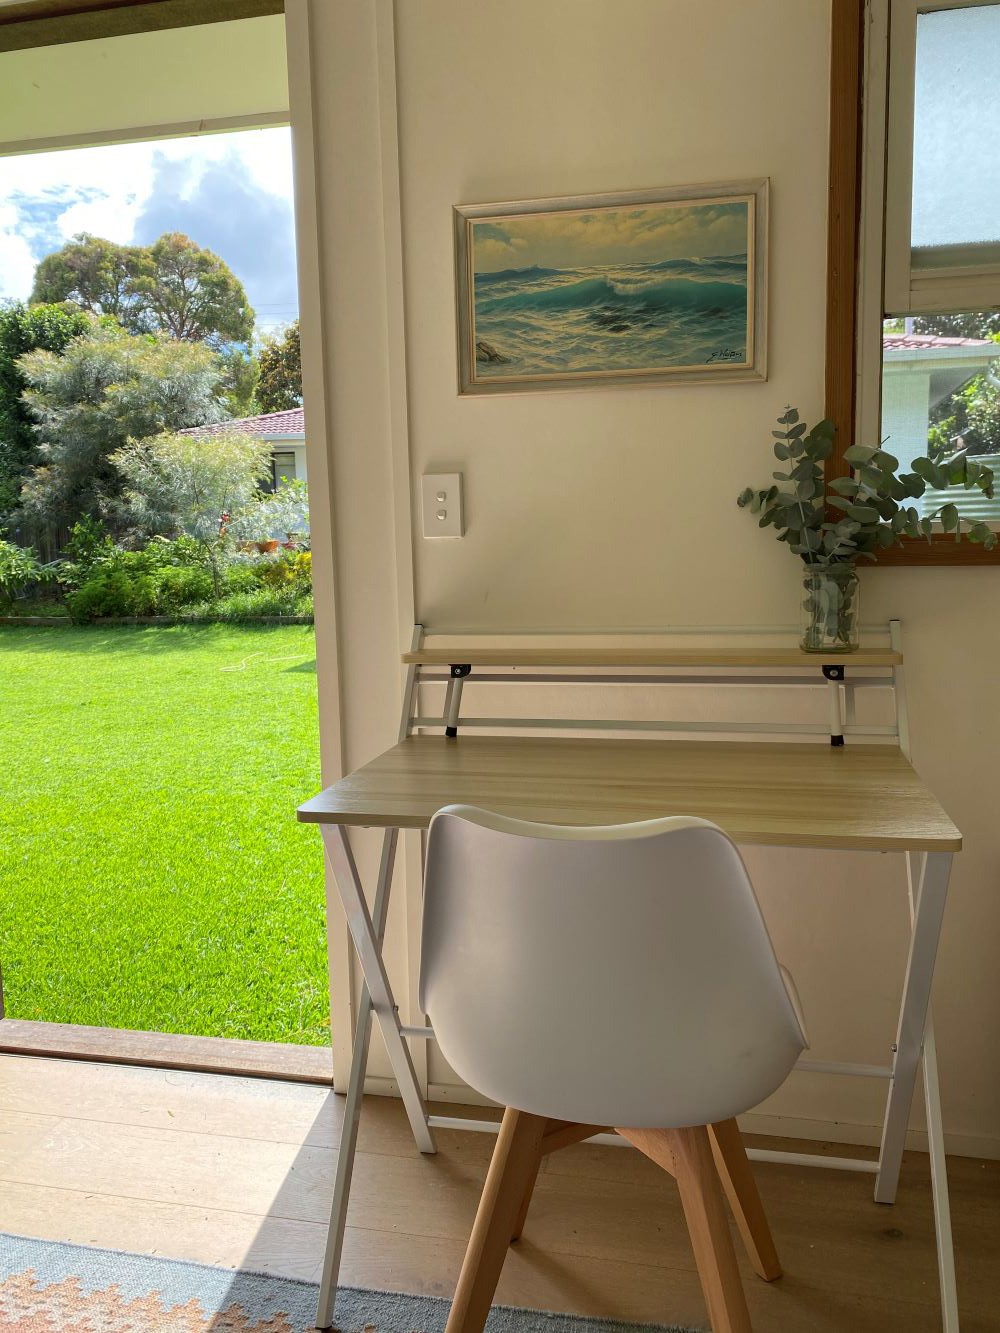 Kays workspace at home - a white chair and desk with a plant sit beneath a painting Theres a view of a green lawn